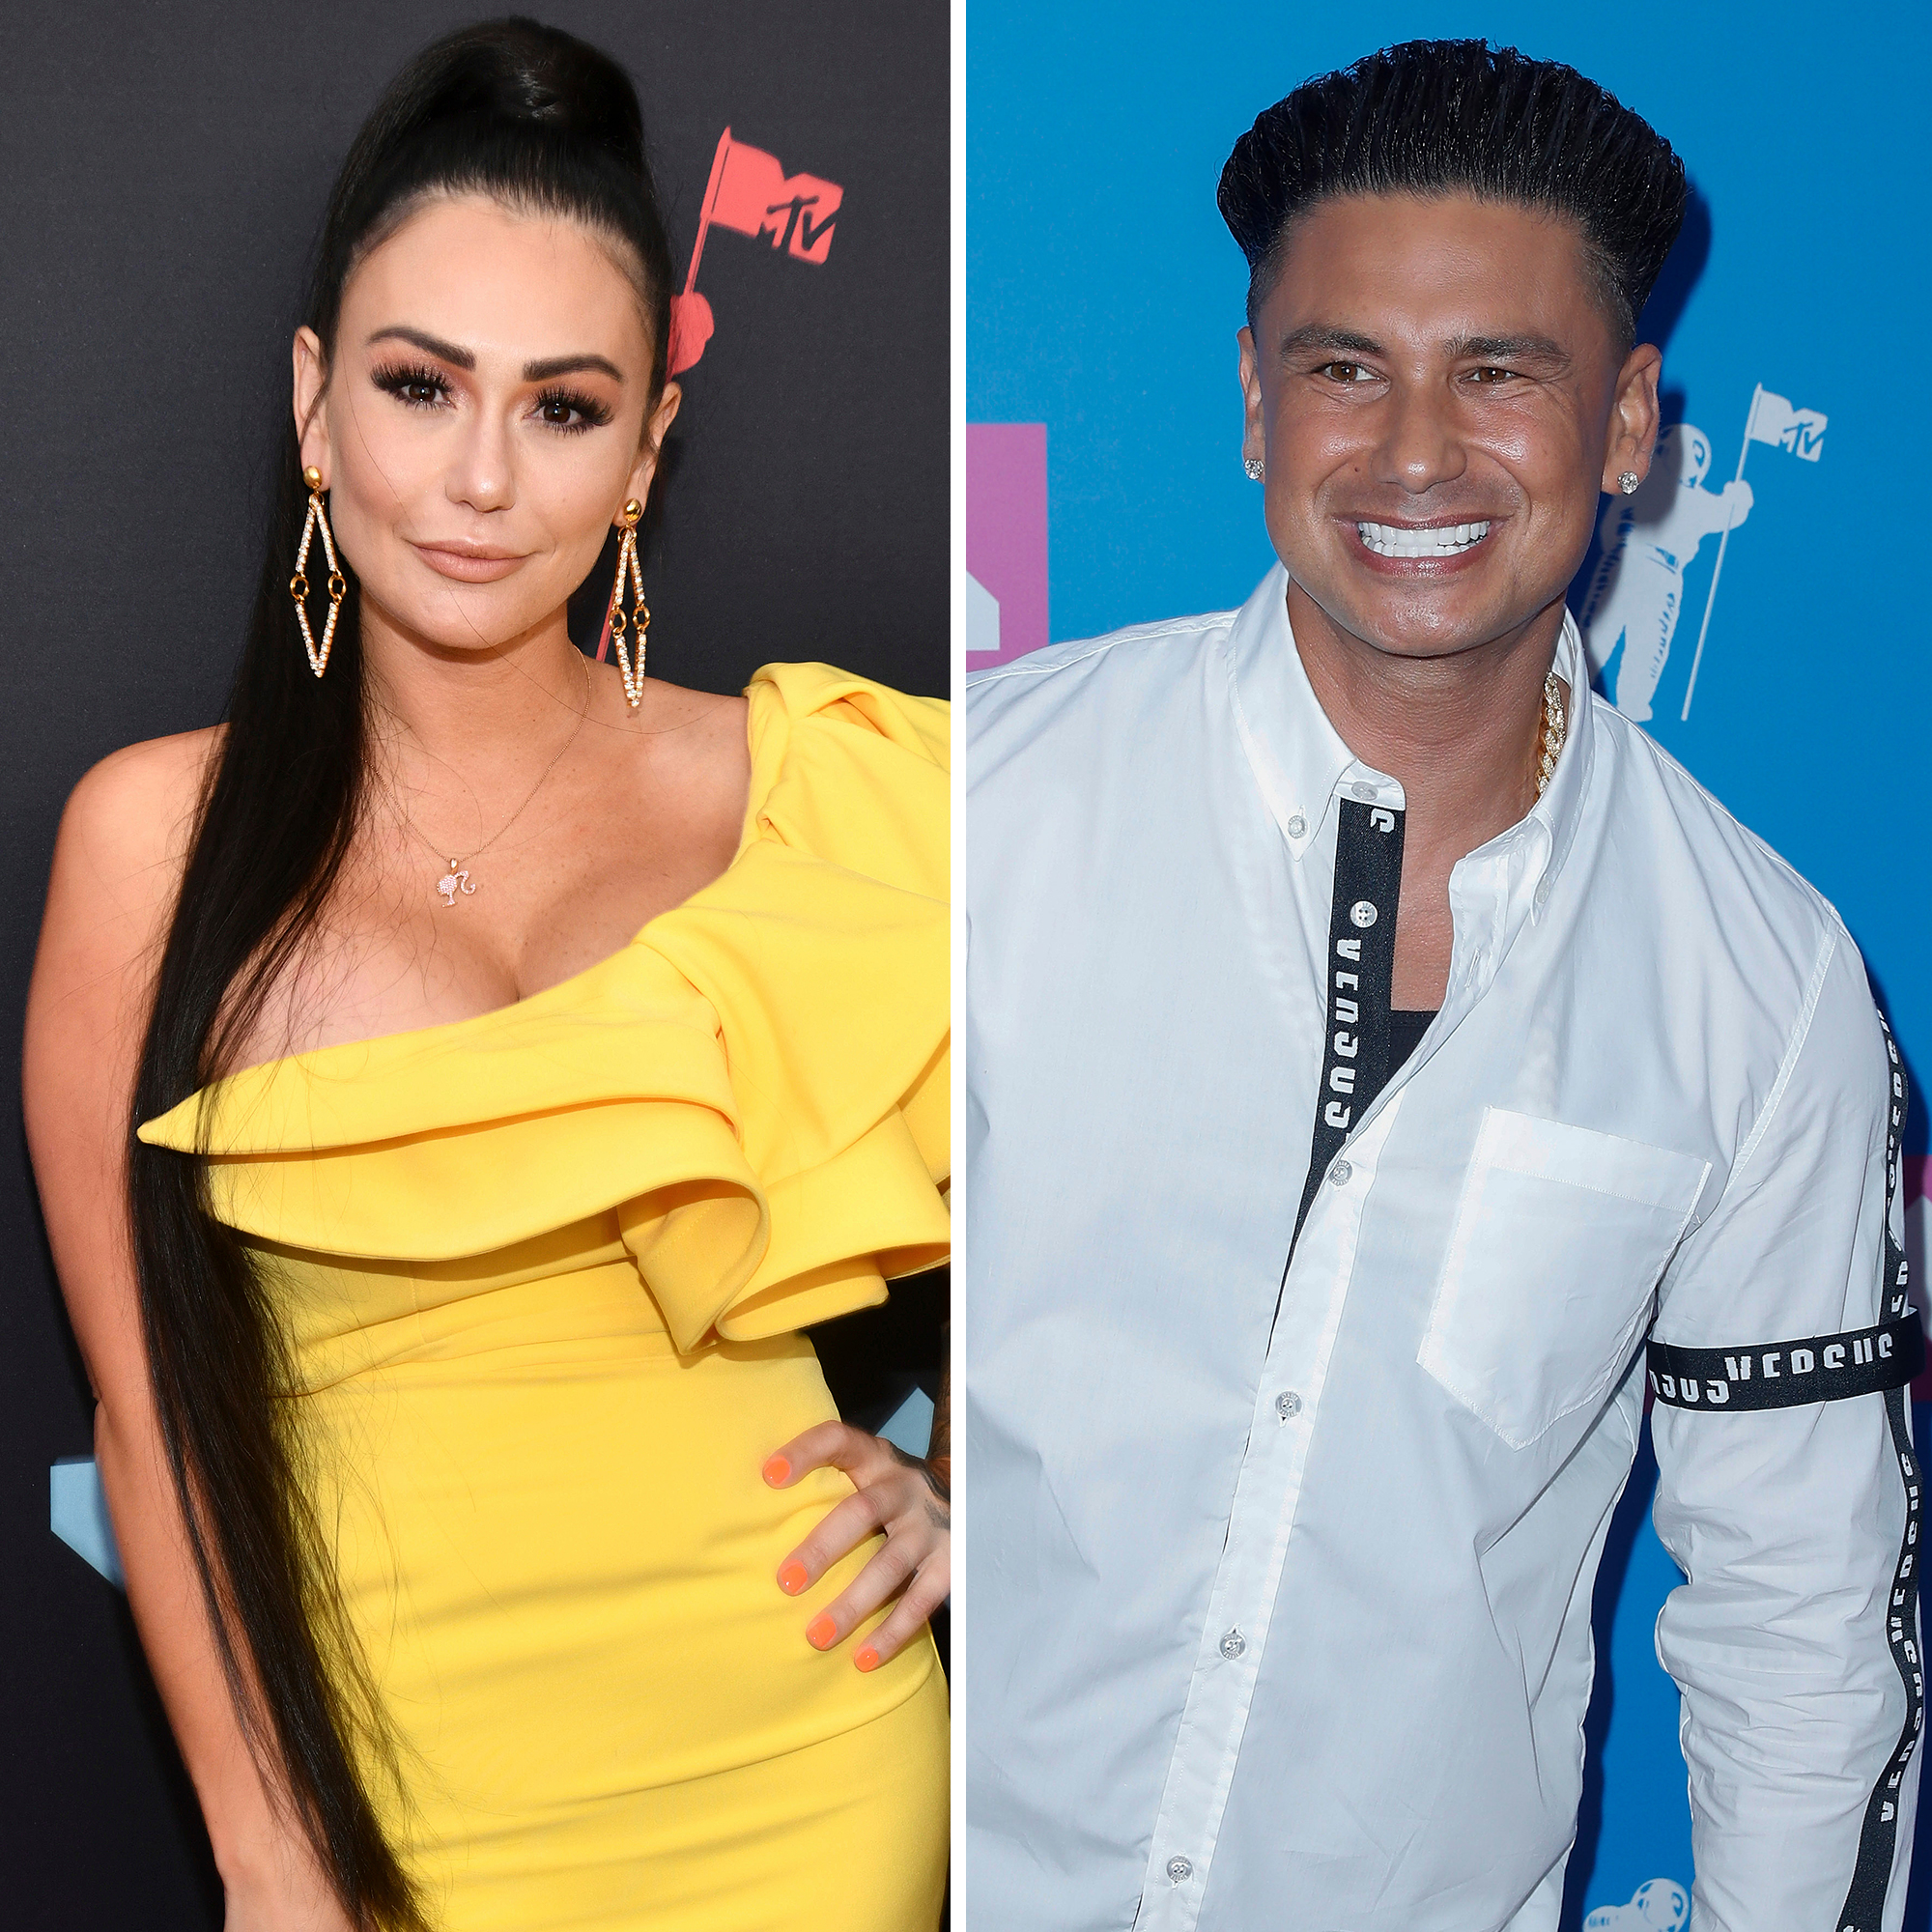 Snooki, JWOWW, and Pauly D's Jersey Shore Spinoffs Get Picked Up